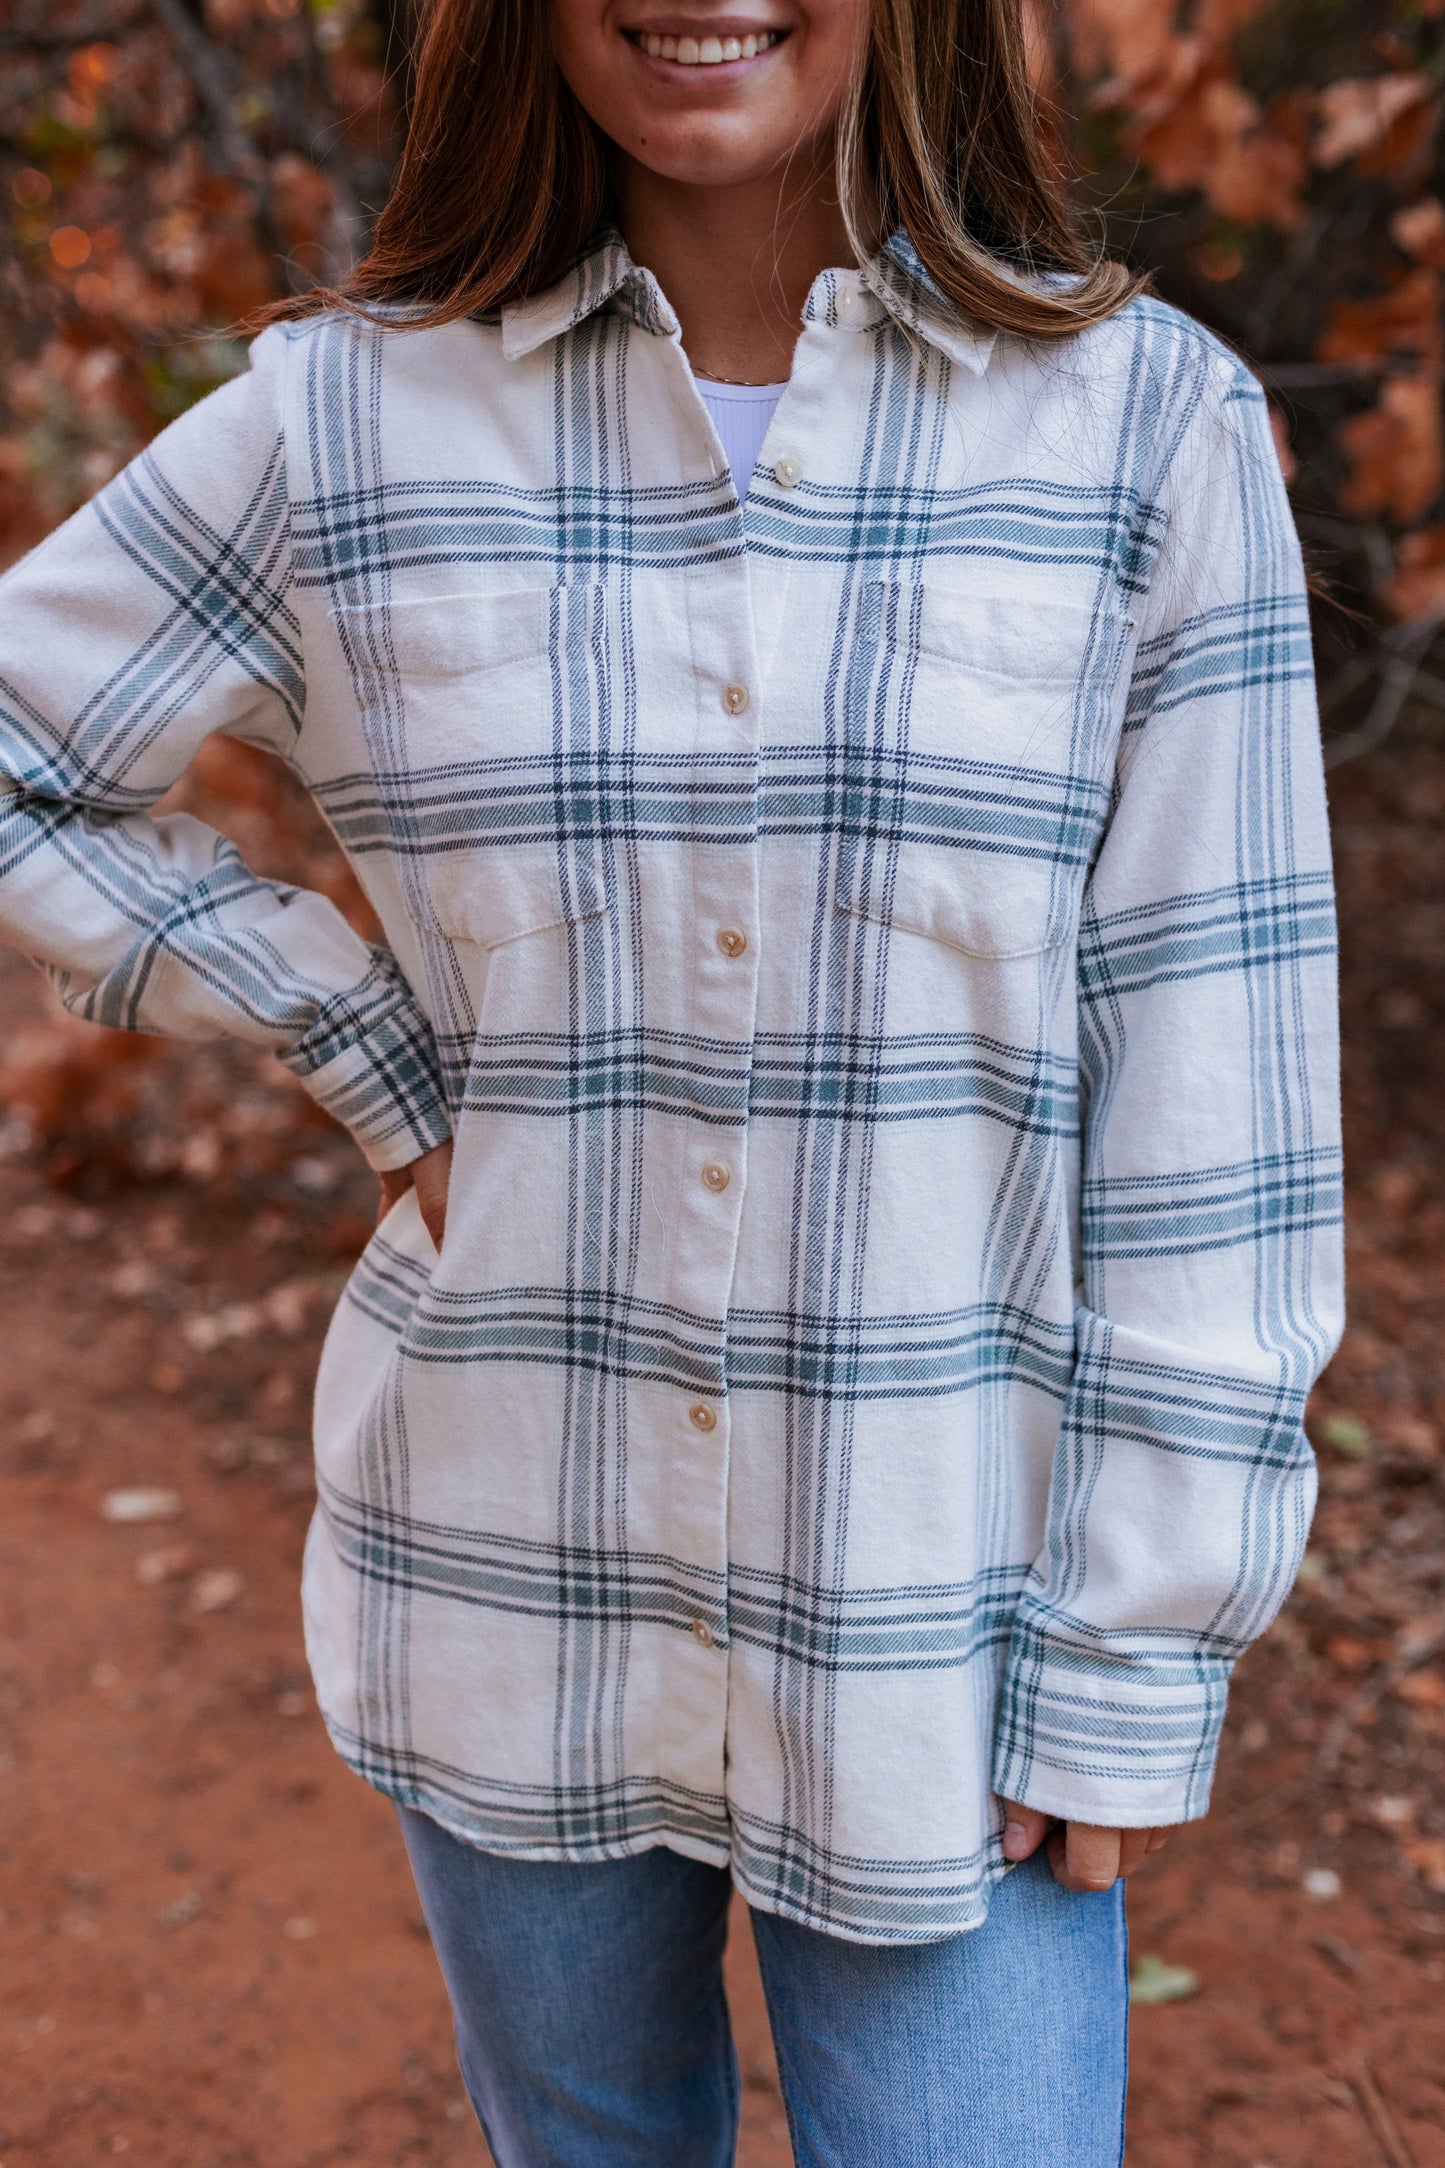 THE DOMINIC FLANNEL TOP